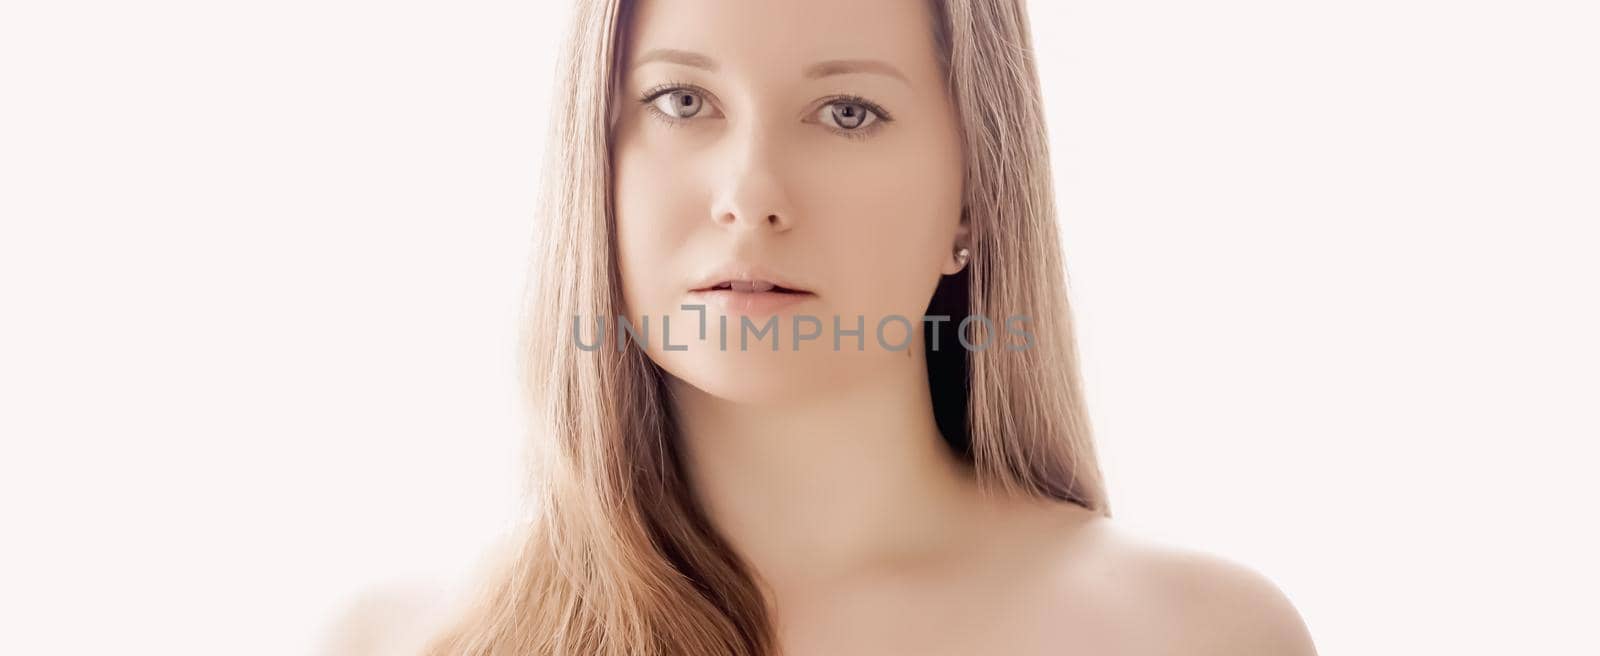 Beautiful woman with natural look, perfect skin and shiny hair as make-up, health and wellness concept. Face portrait of young female model for skincare cosmetics and luxury beauty ad design by Anneleven